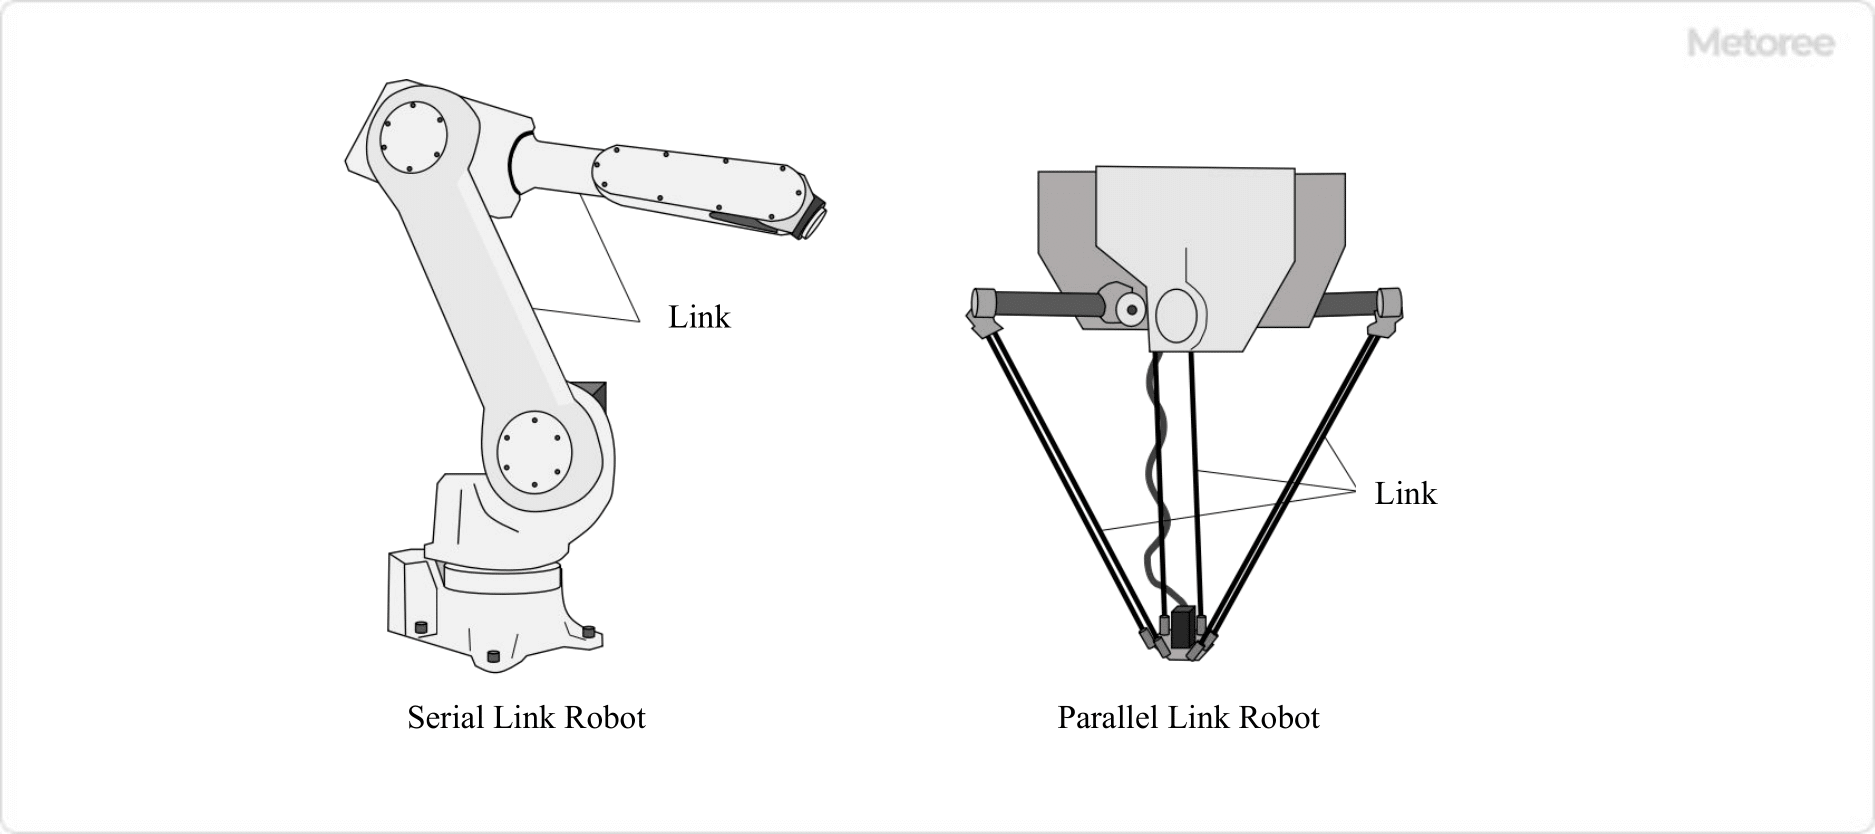 Figure 1. Serial Link Robot and Parallel Link Robot